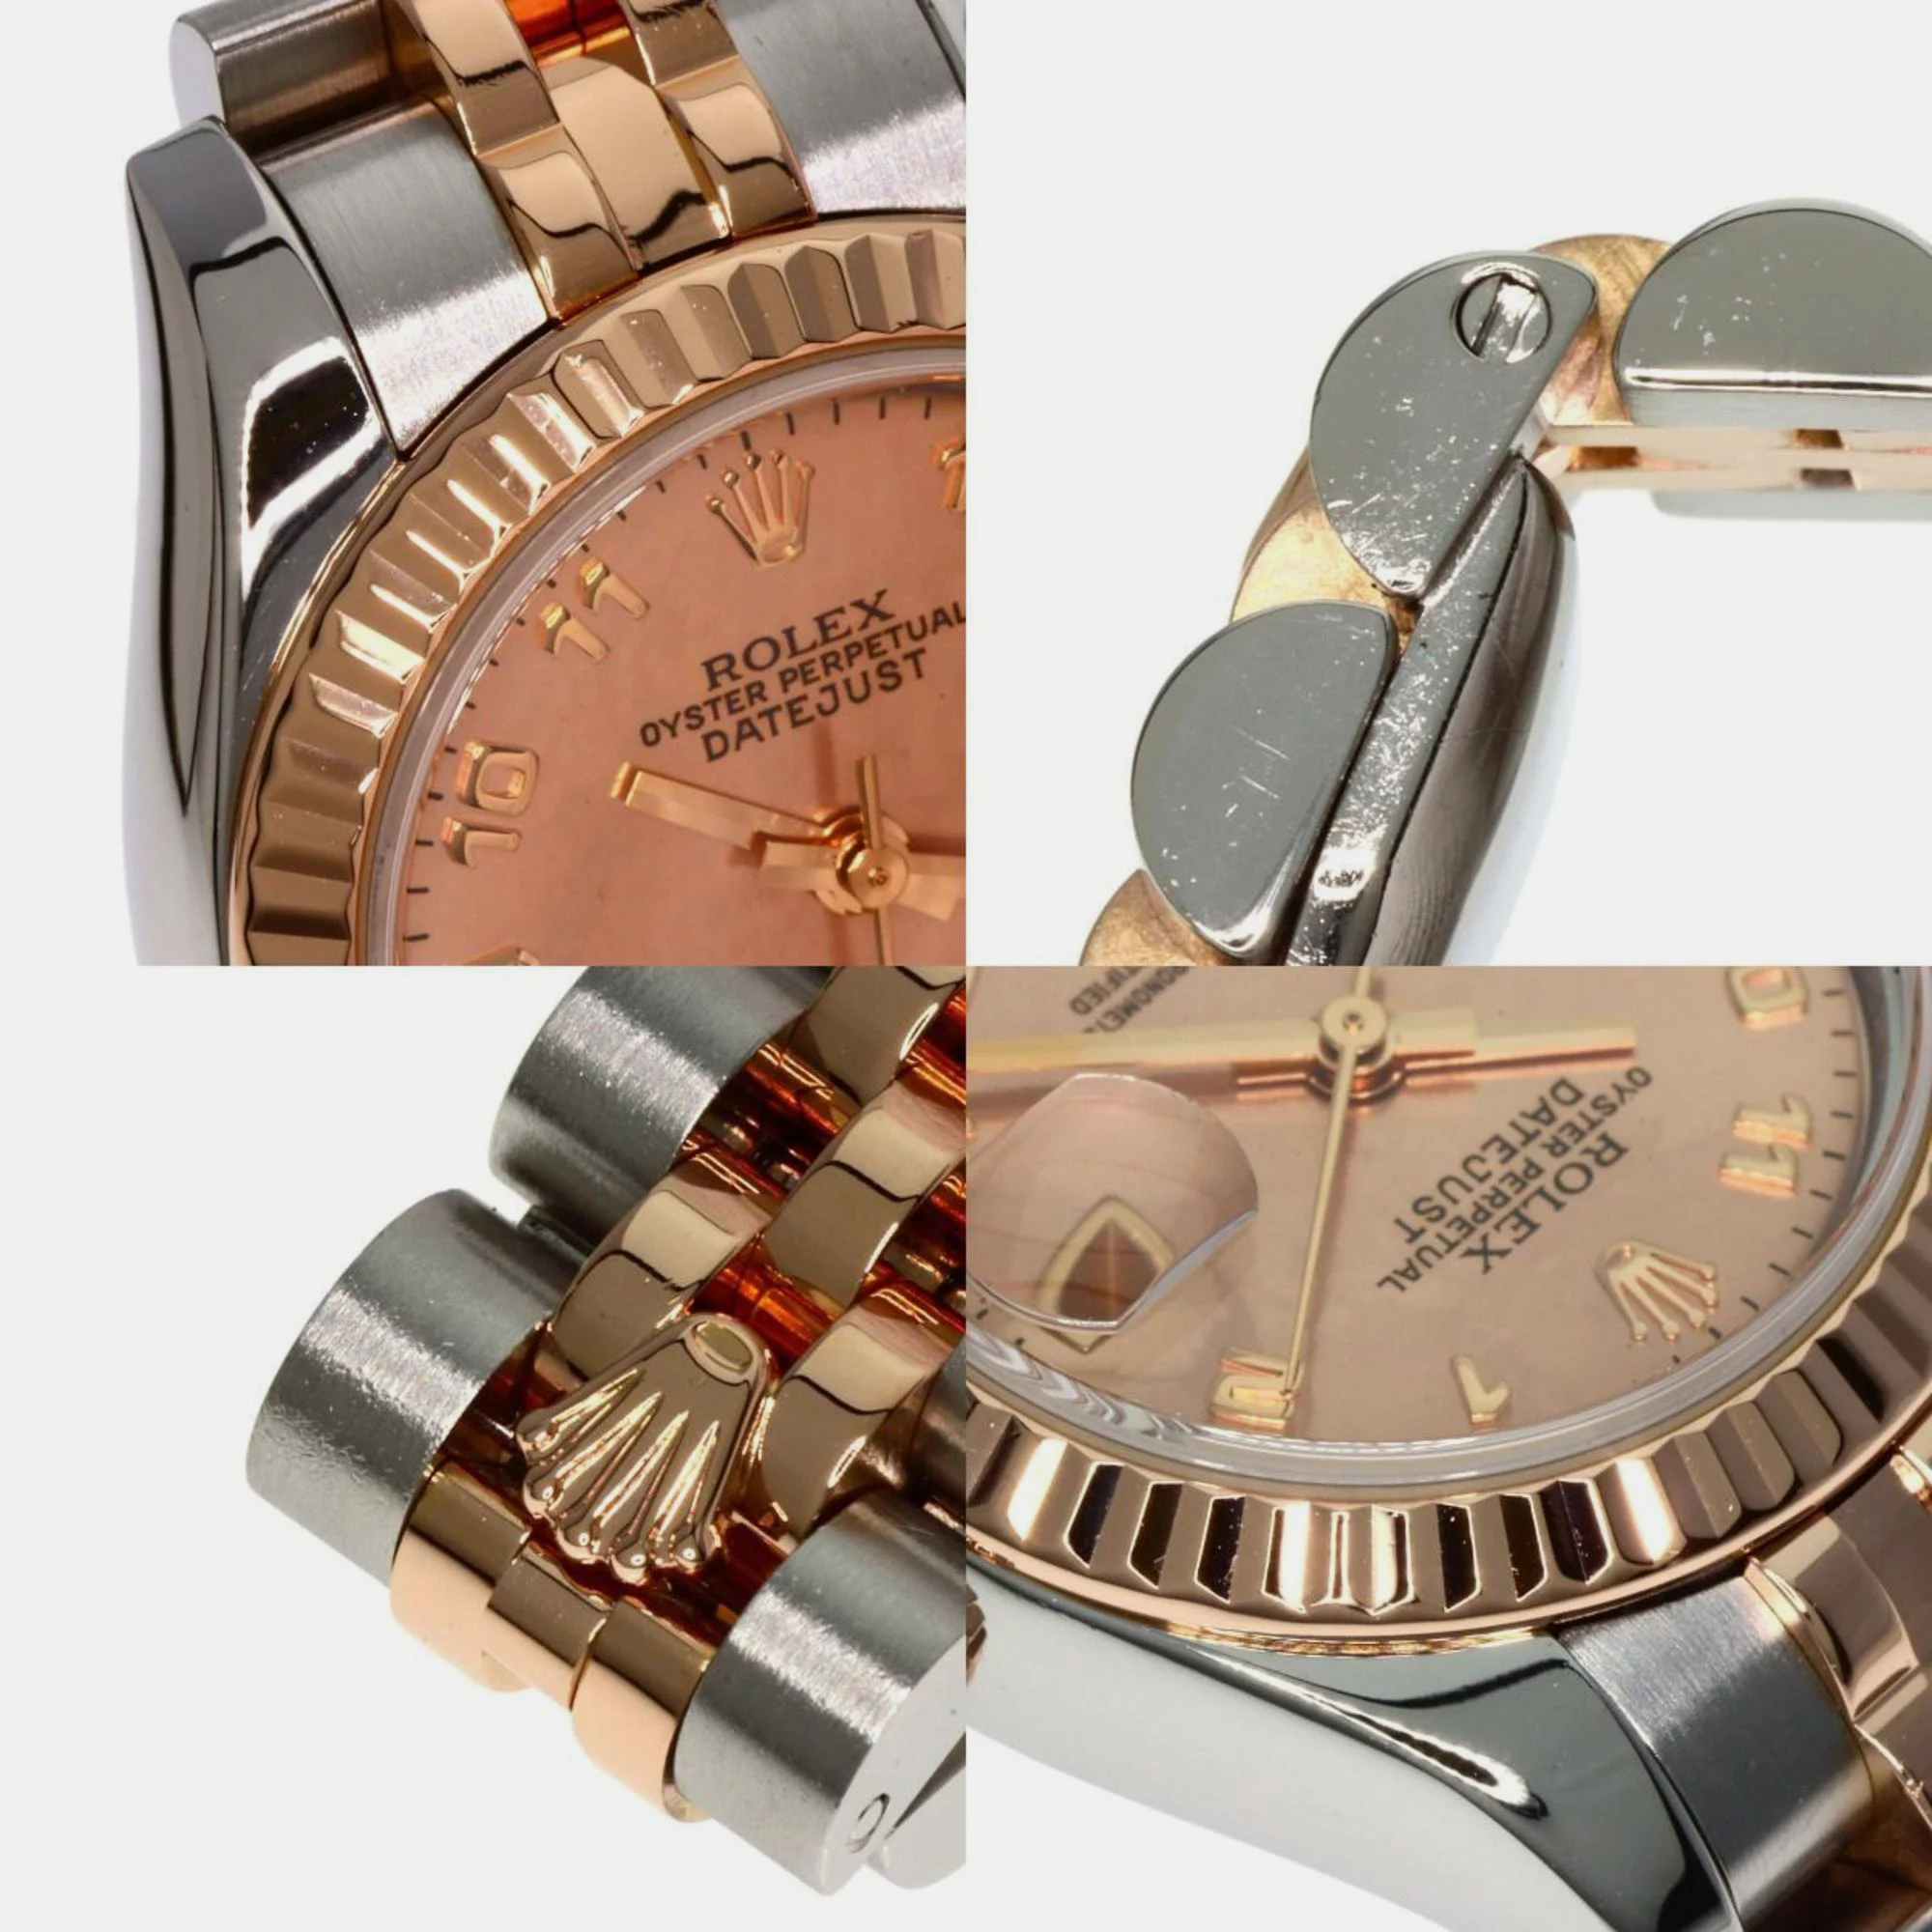 Rolex Pink Diamond 18k Rose Gold And Stainless Steel Datejust 179171N2BR Automatic Women's Wristwatch 26 Mm